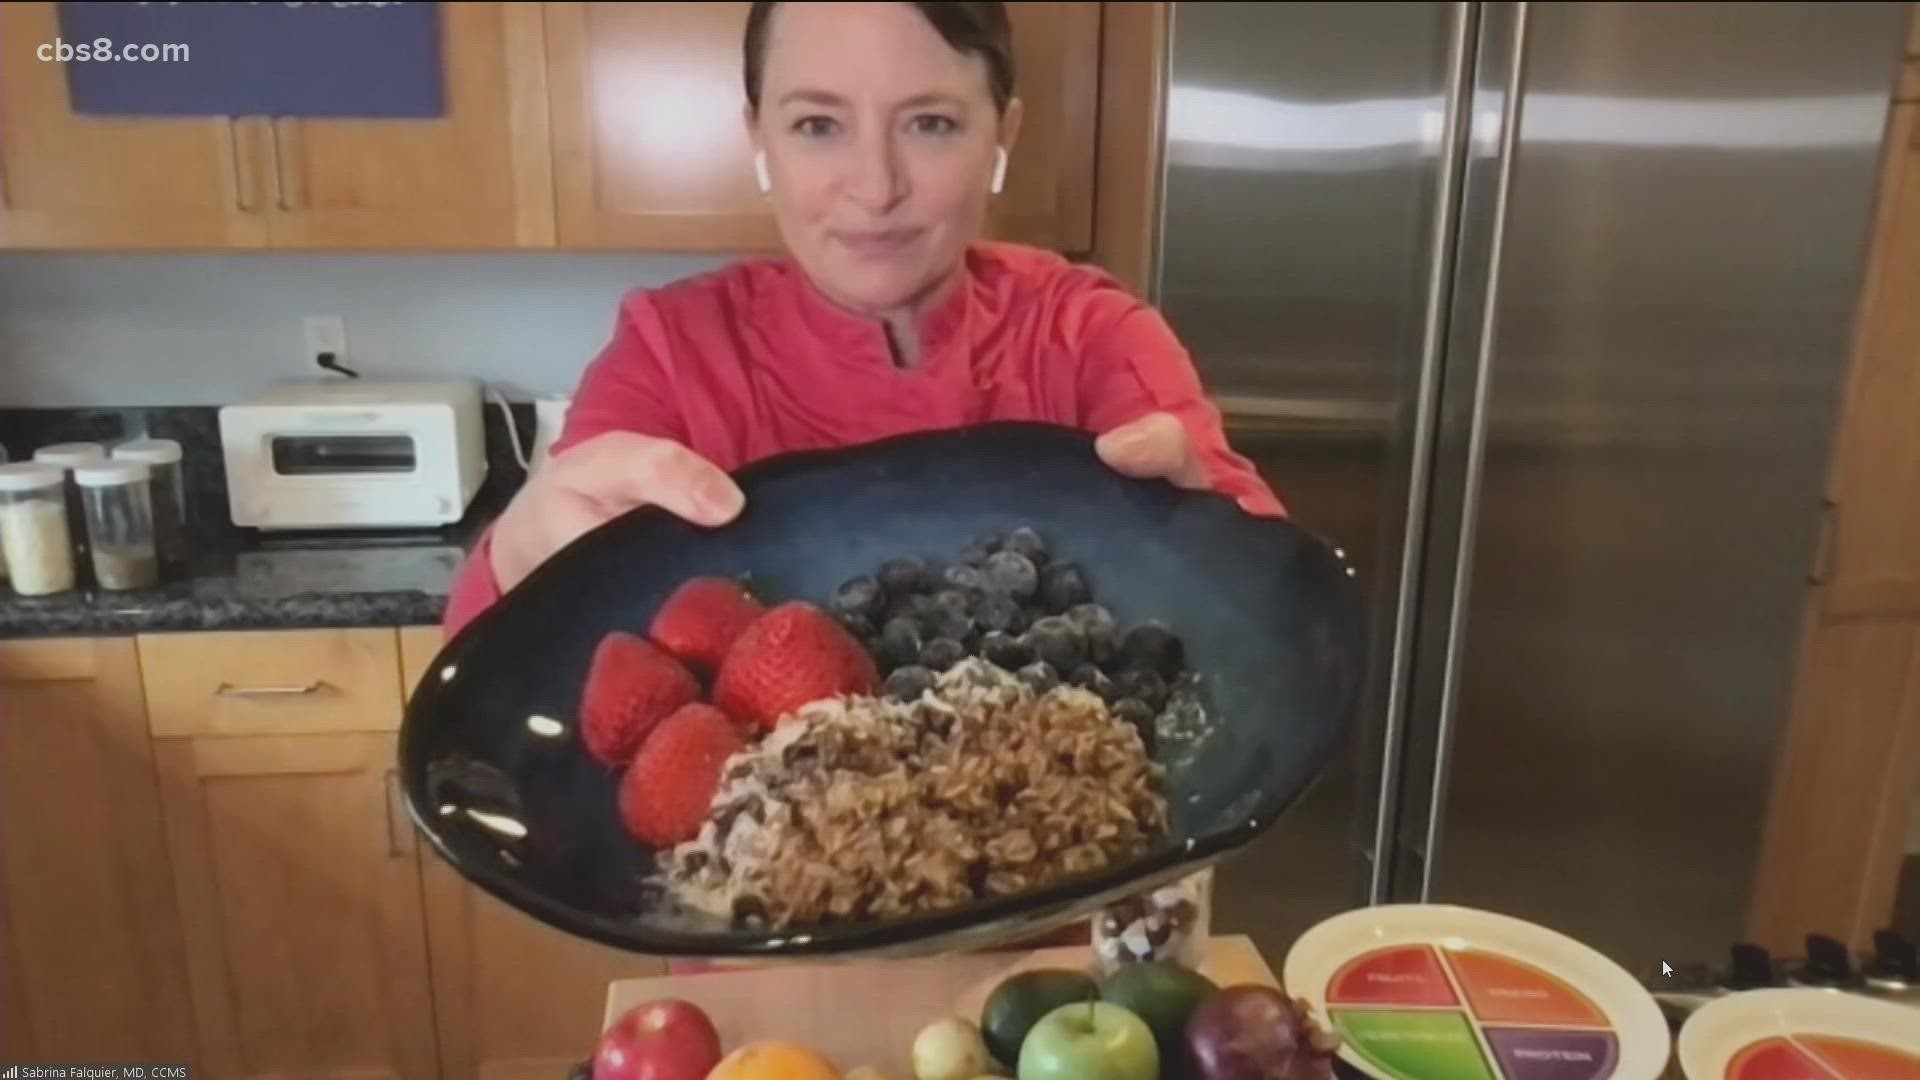 Specializing in Culinary Medicine Dr. Sabrina Falquier says we can eat our way to happiness. Go to: https://www.sensationssalud.com